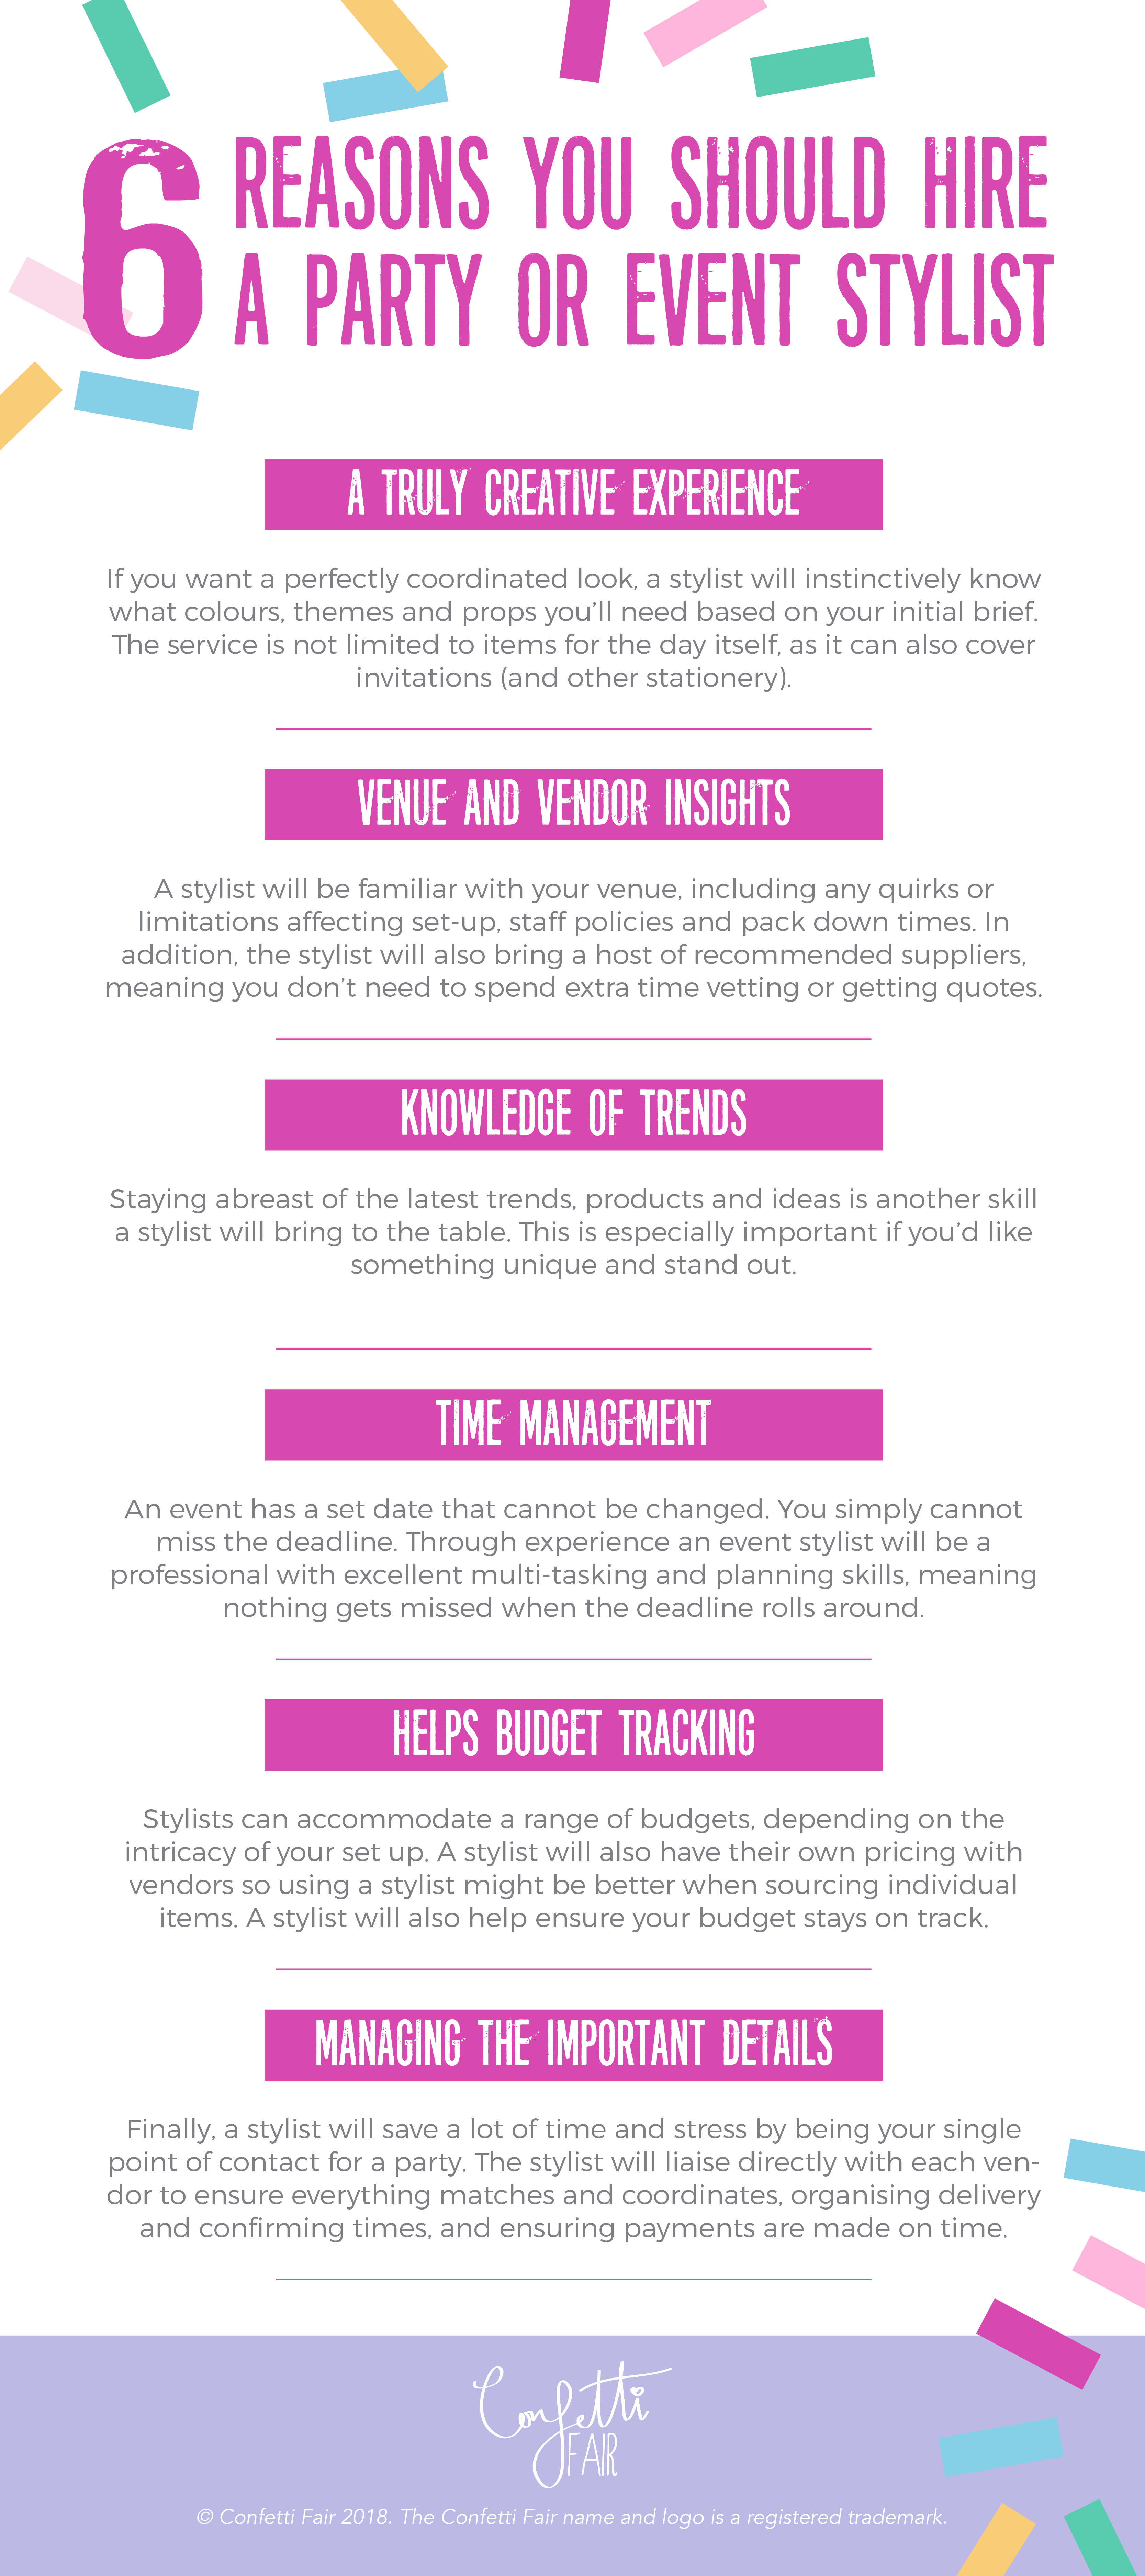 hire a party stylist, 10 reasons why you need to hire a party stylist (infographic)